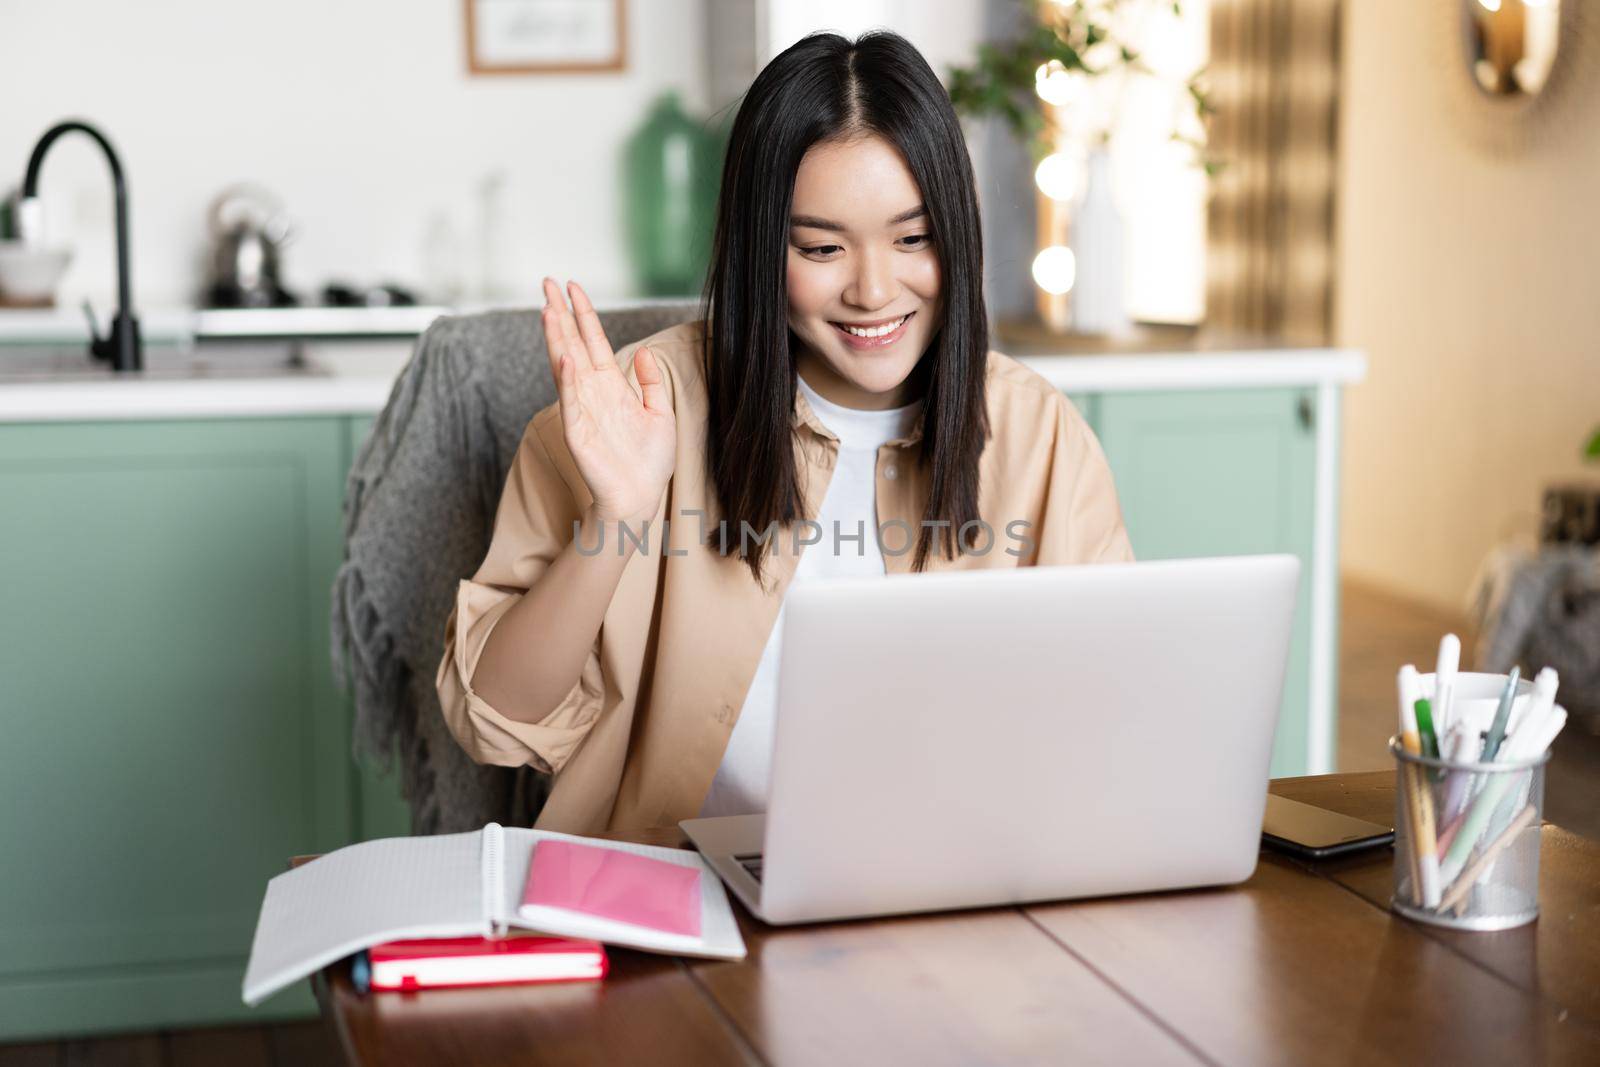 Image of asian girl on video call, waving hand at her video chat on laptop and smiling. Student or teacher greeting people during remote class online.